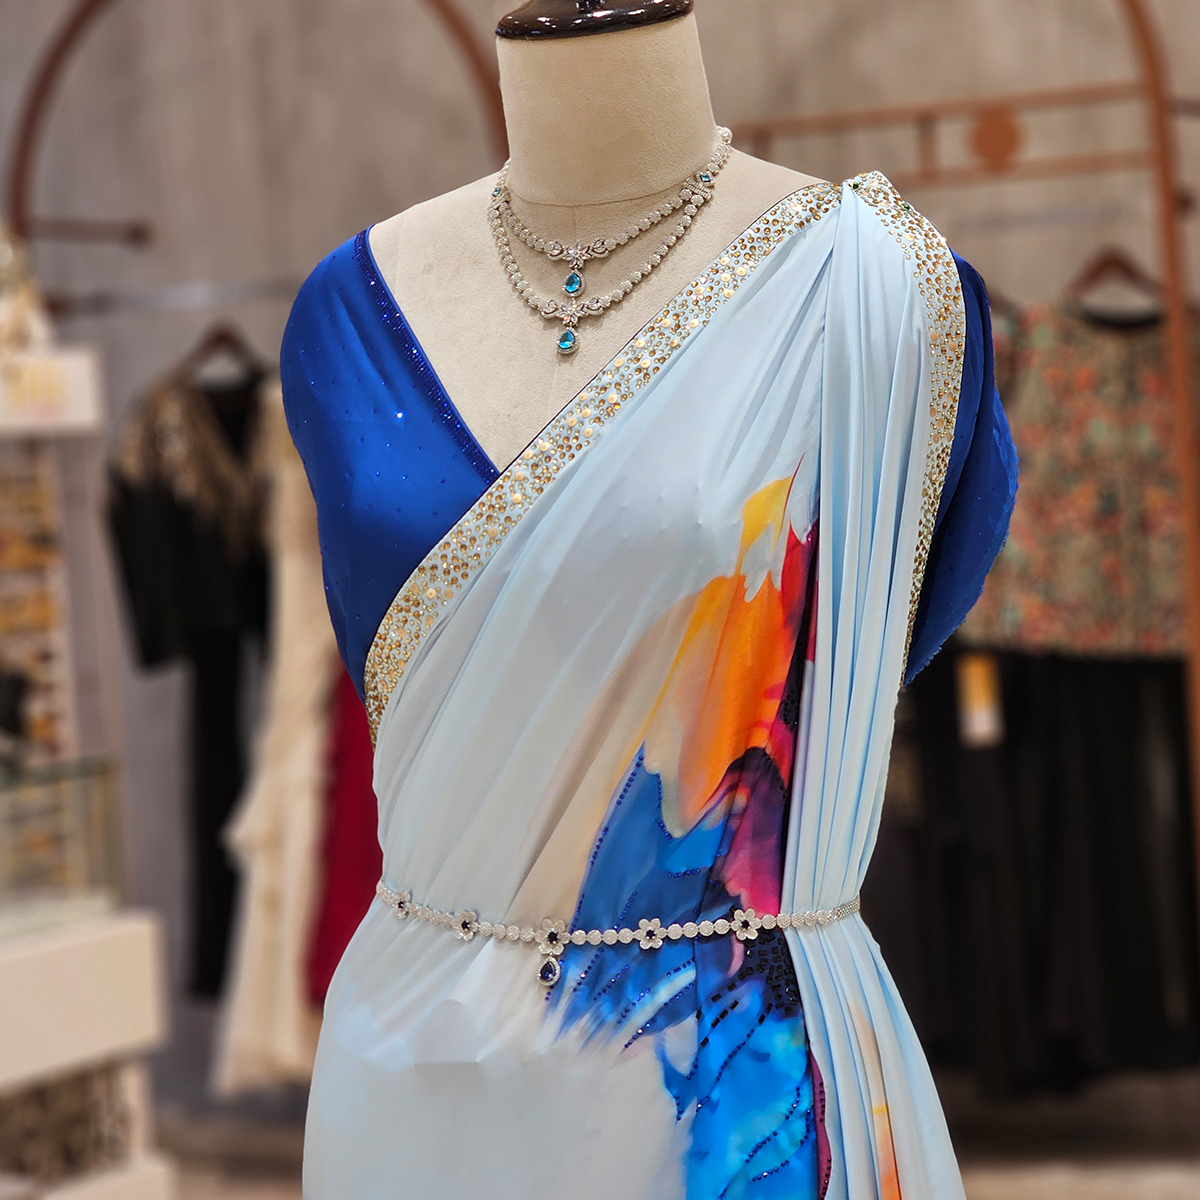 Abstract Vibe🌟  Vibrant abstract print saree with a colorful palette complemented by detailed border work✨   Visit us and find your perfect statement saree💫  #neerusindia #neerus #neerusfashion #newcollection #ethnicwear  #lehengas #bridal #gowns #sarees #fusion